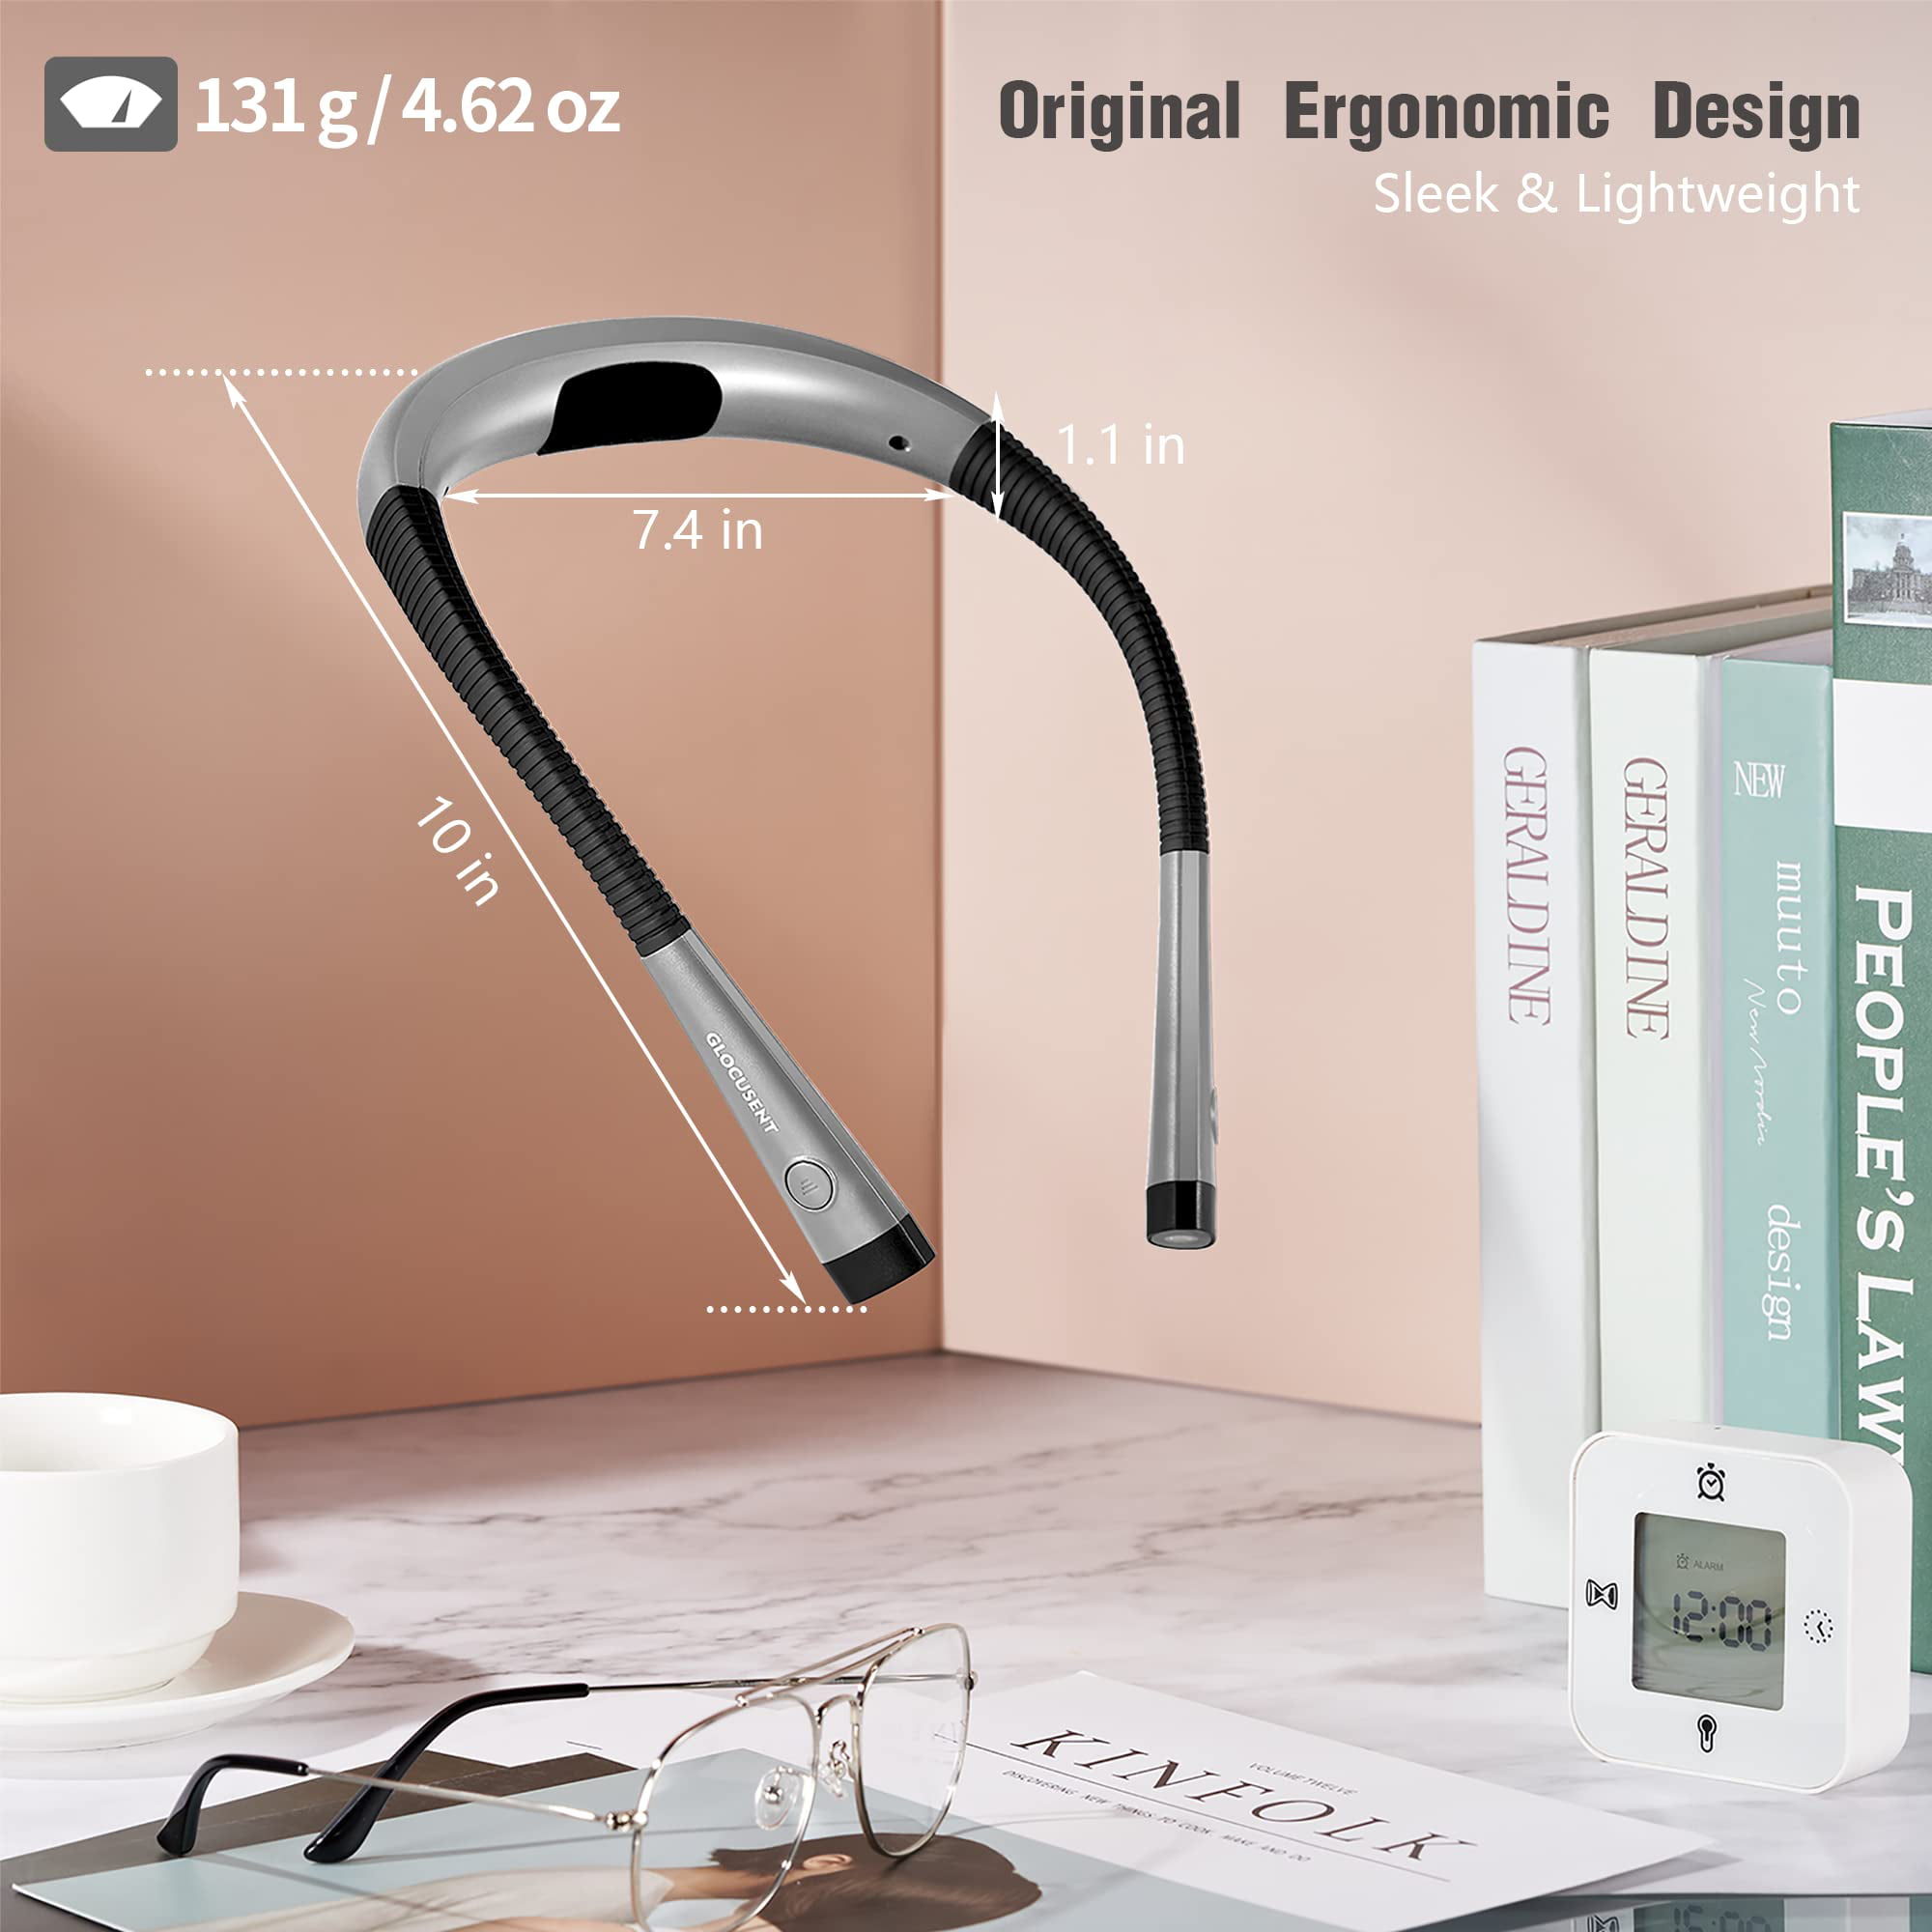 Case Compatible with Glocusent丨Vekkia丨LITOM丨LEDGLE丨TAKKUI丨TSINGREE LED Neck Reading Light Book Light for Reading in Bed Box Only Storage Carrying Holder Fits for USB Cable